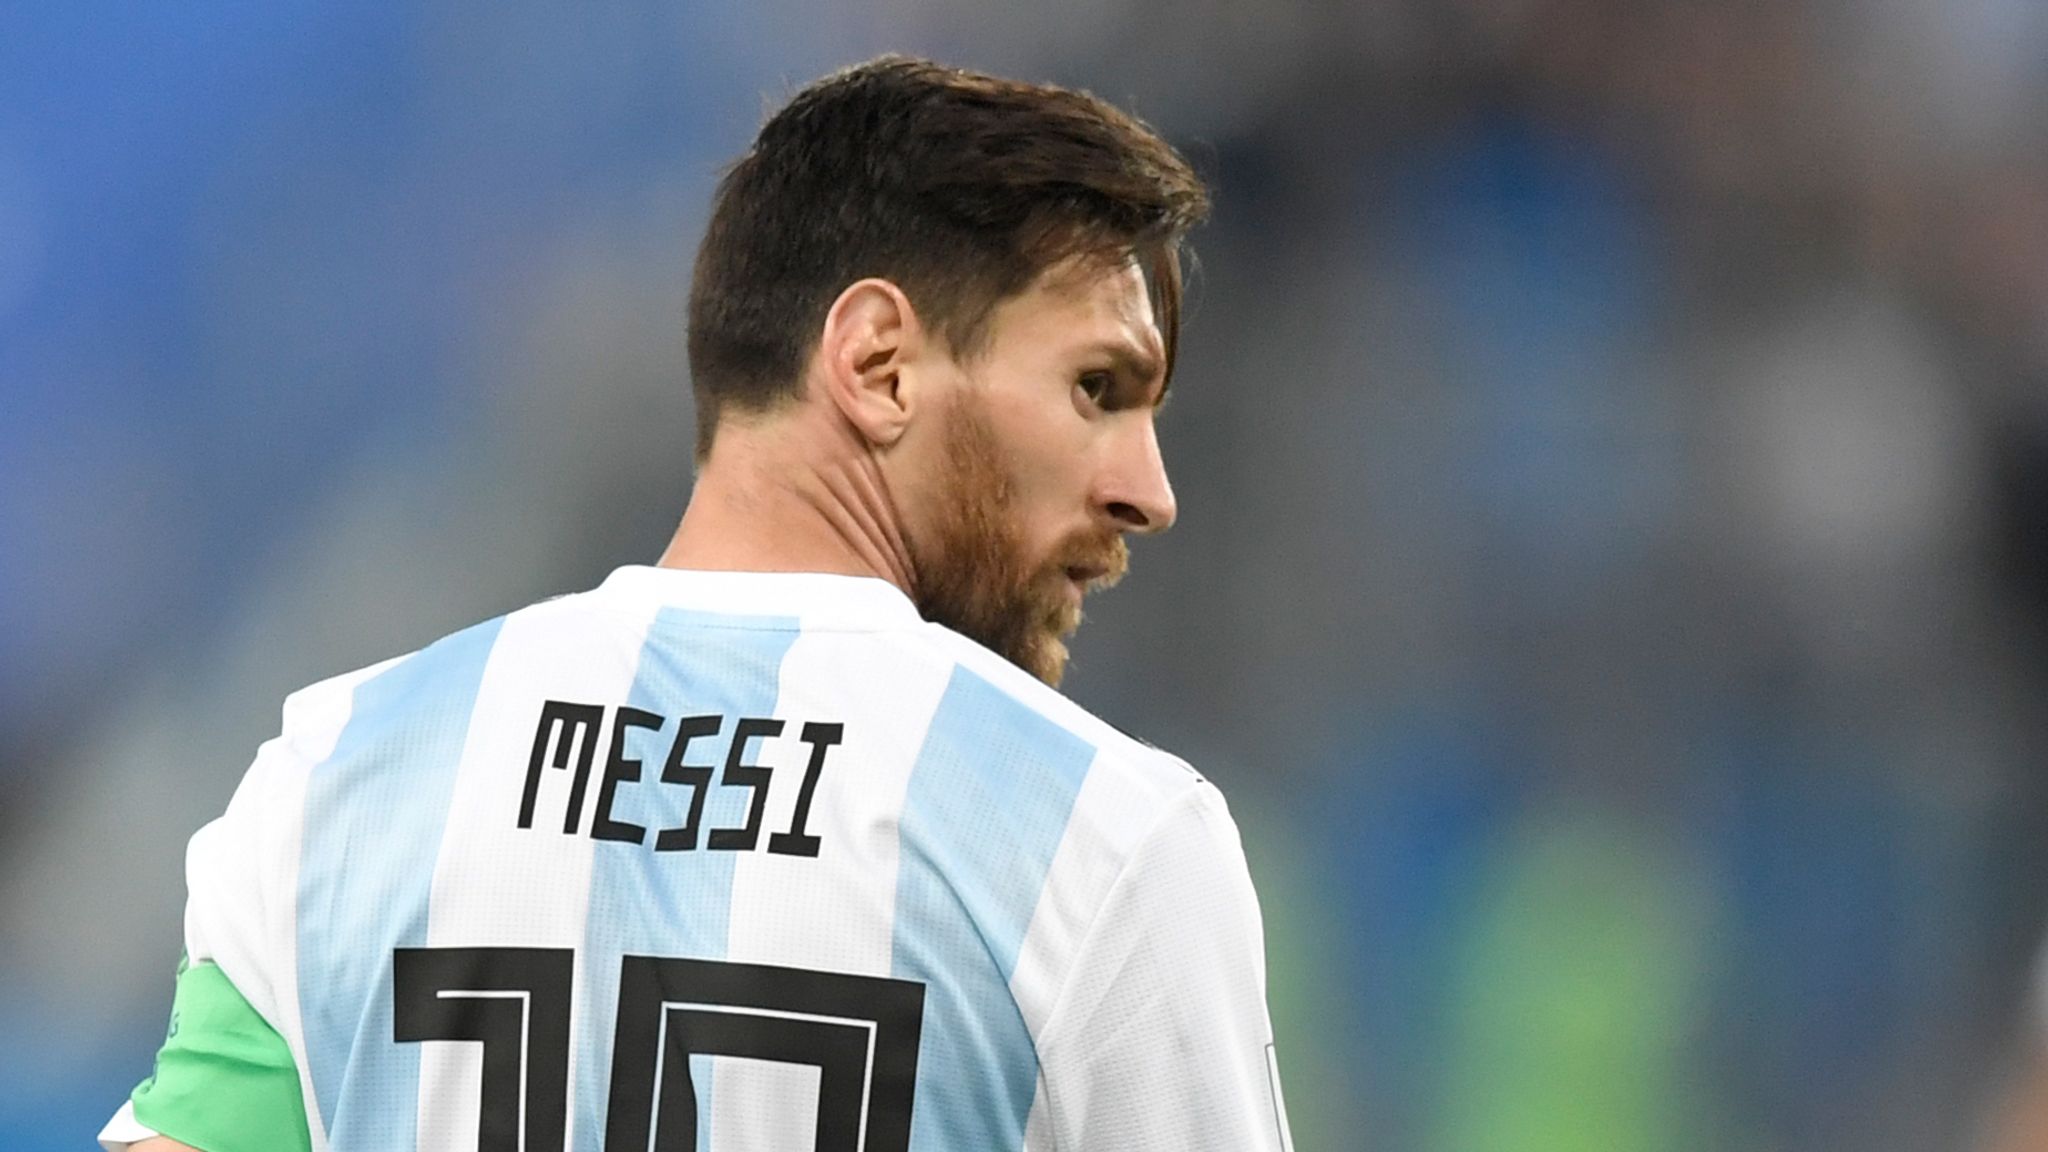 Lionel Messi-led Argentina was scheduled to play in India but All India Football Federation declined